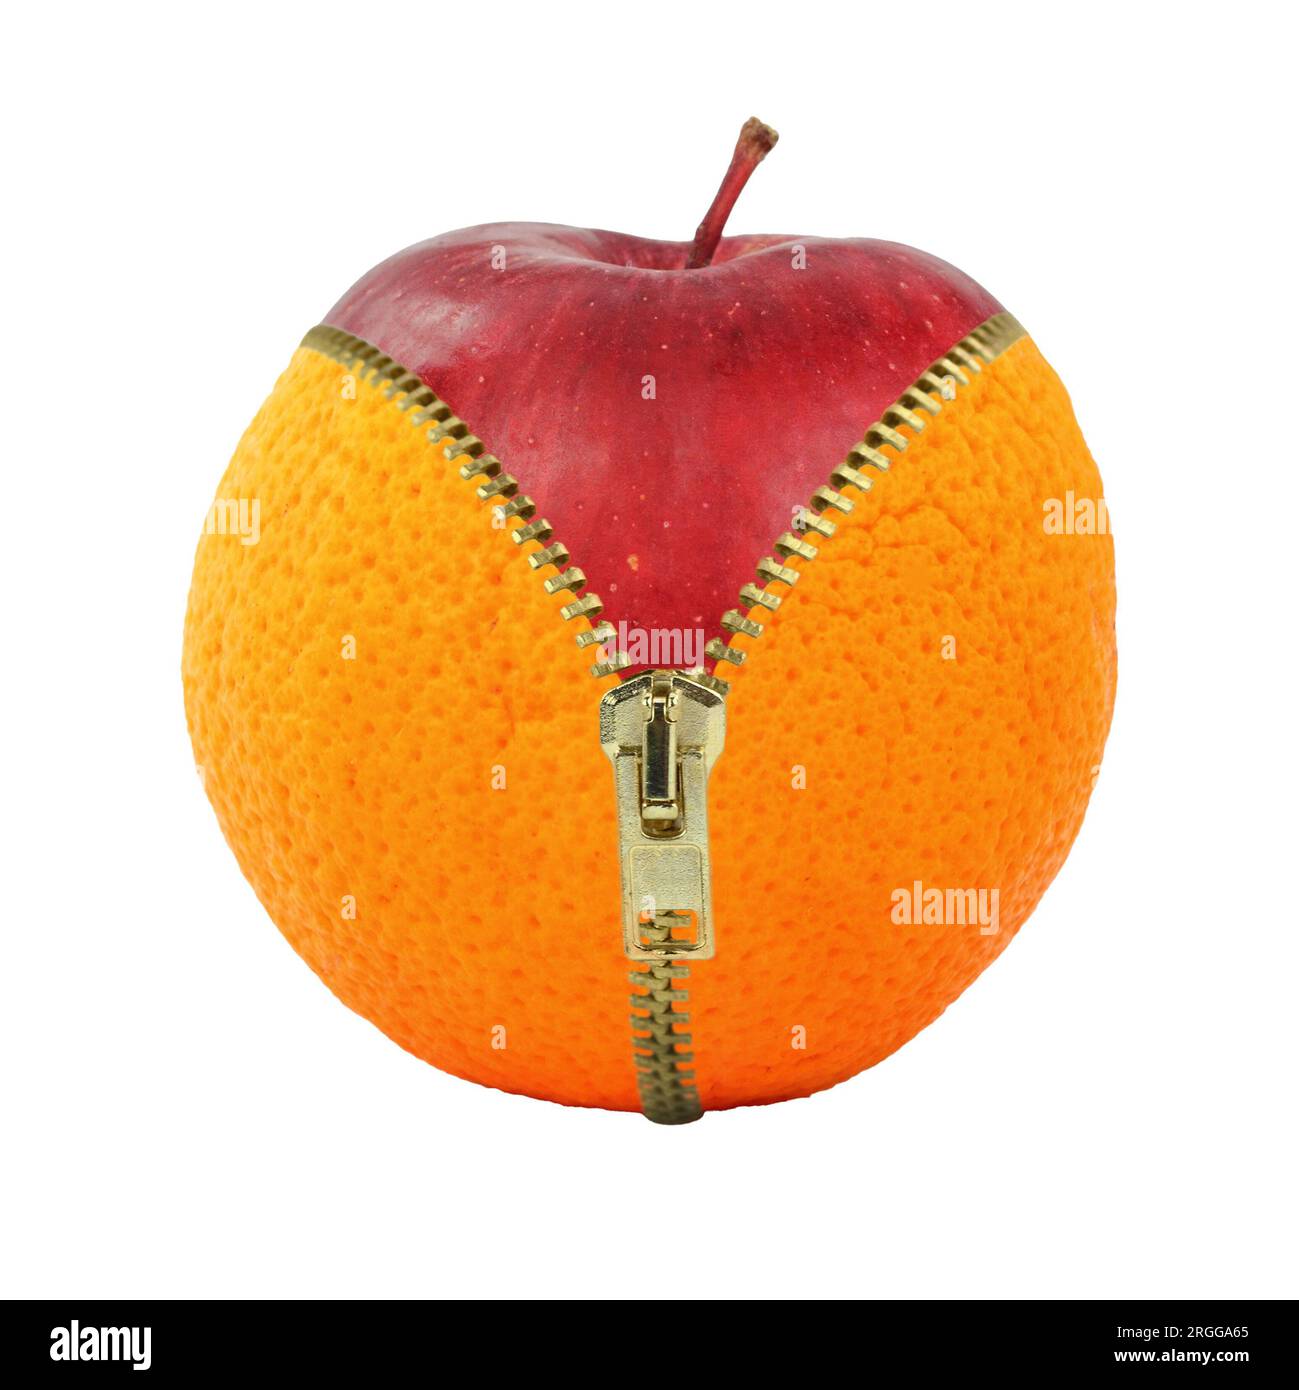 Healthy eating cellulite diet and fruits, Apple orange and zipper isolated on white transparent, Stock Photo